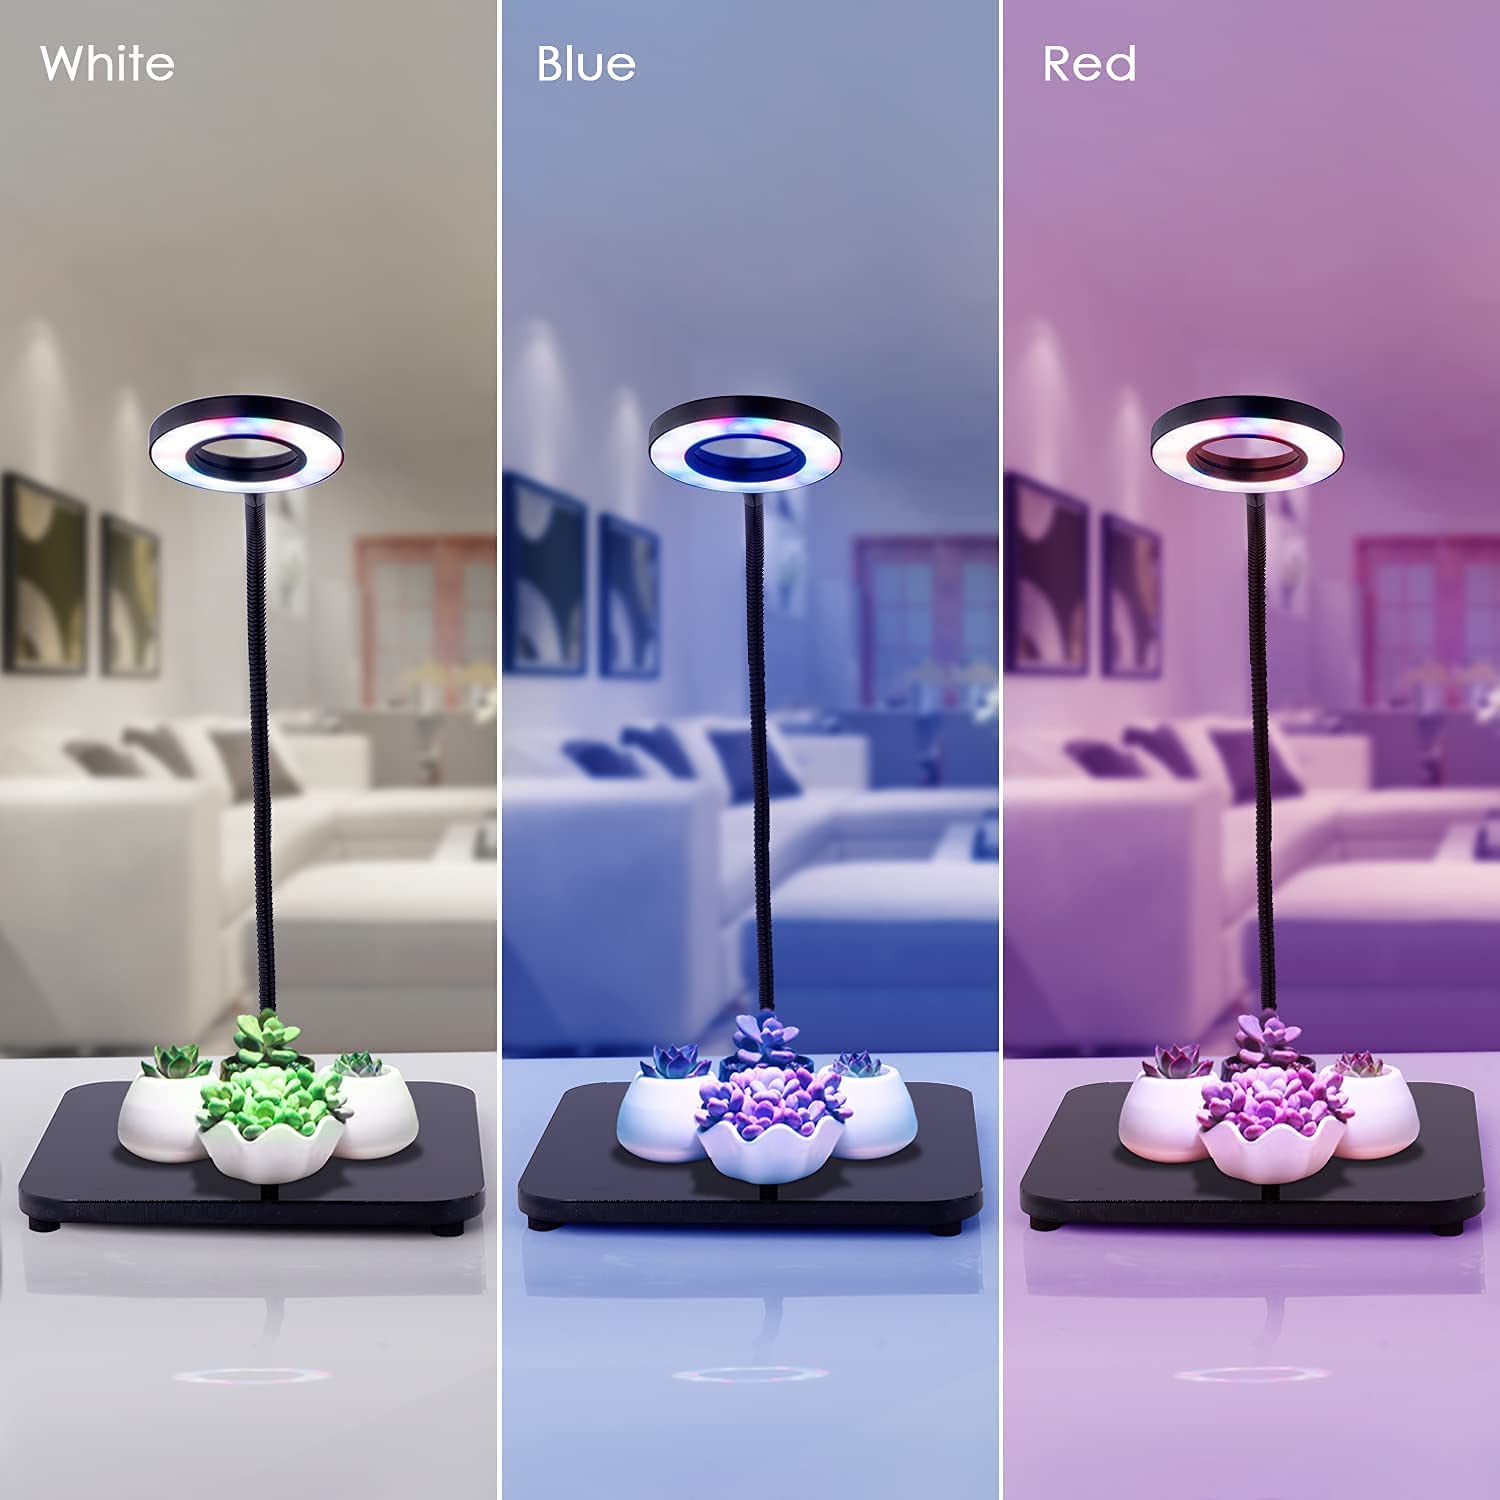 difference between white, red, and blue color grow lights